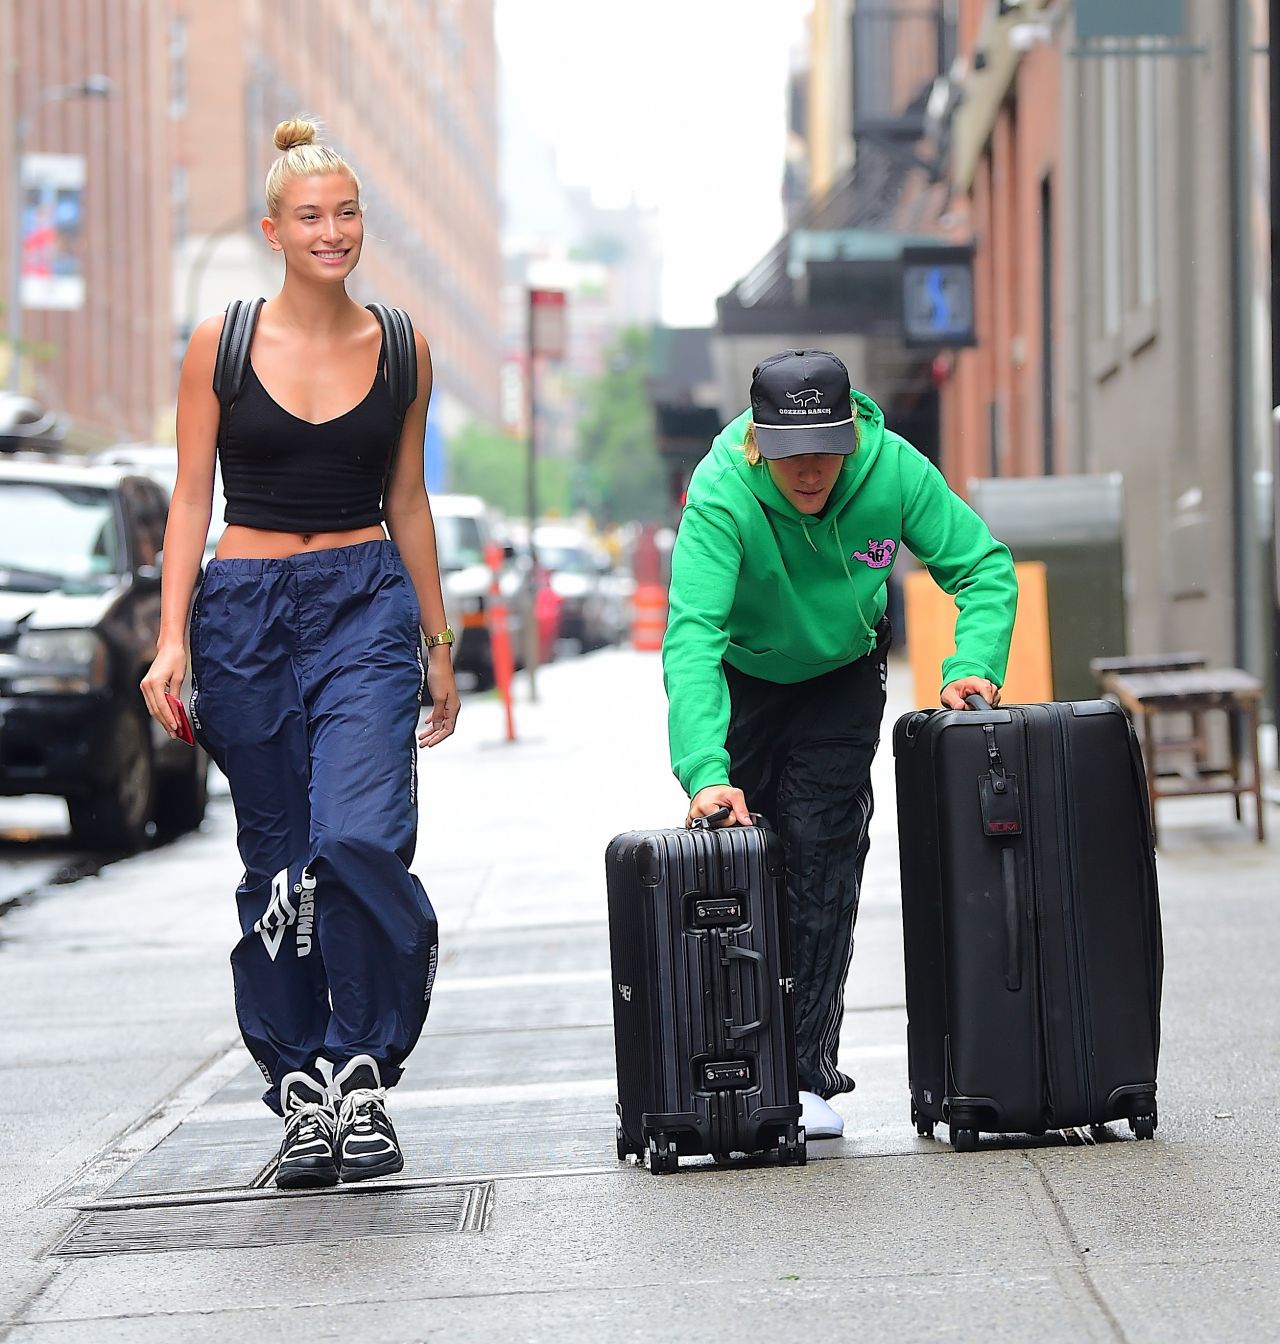 hailey-baldwin-and-justin-bieber-out-in-nyc-07-06-2018-4.jpg